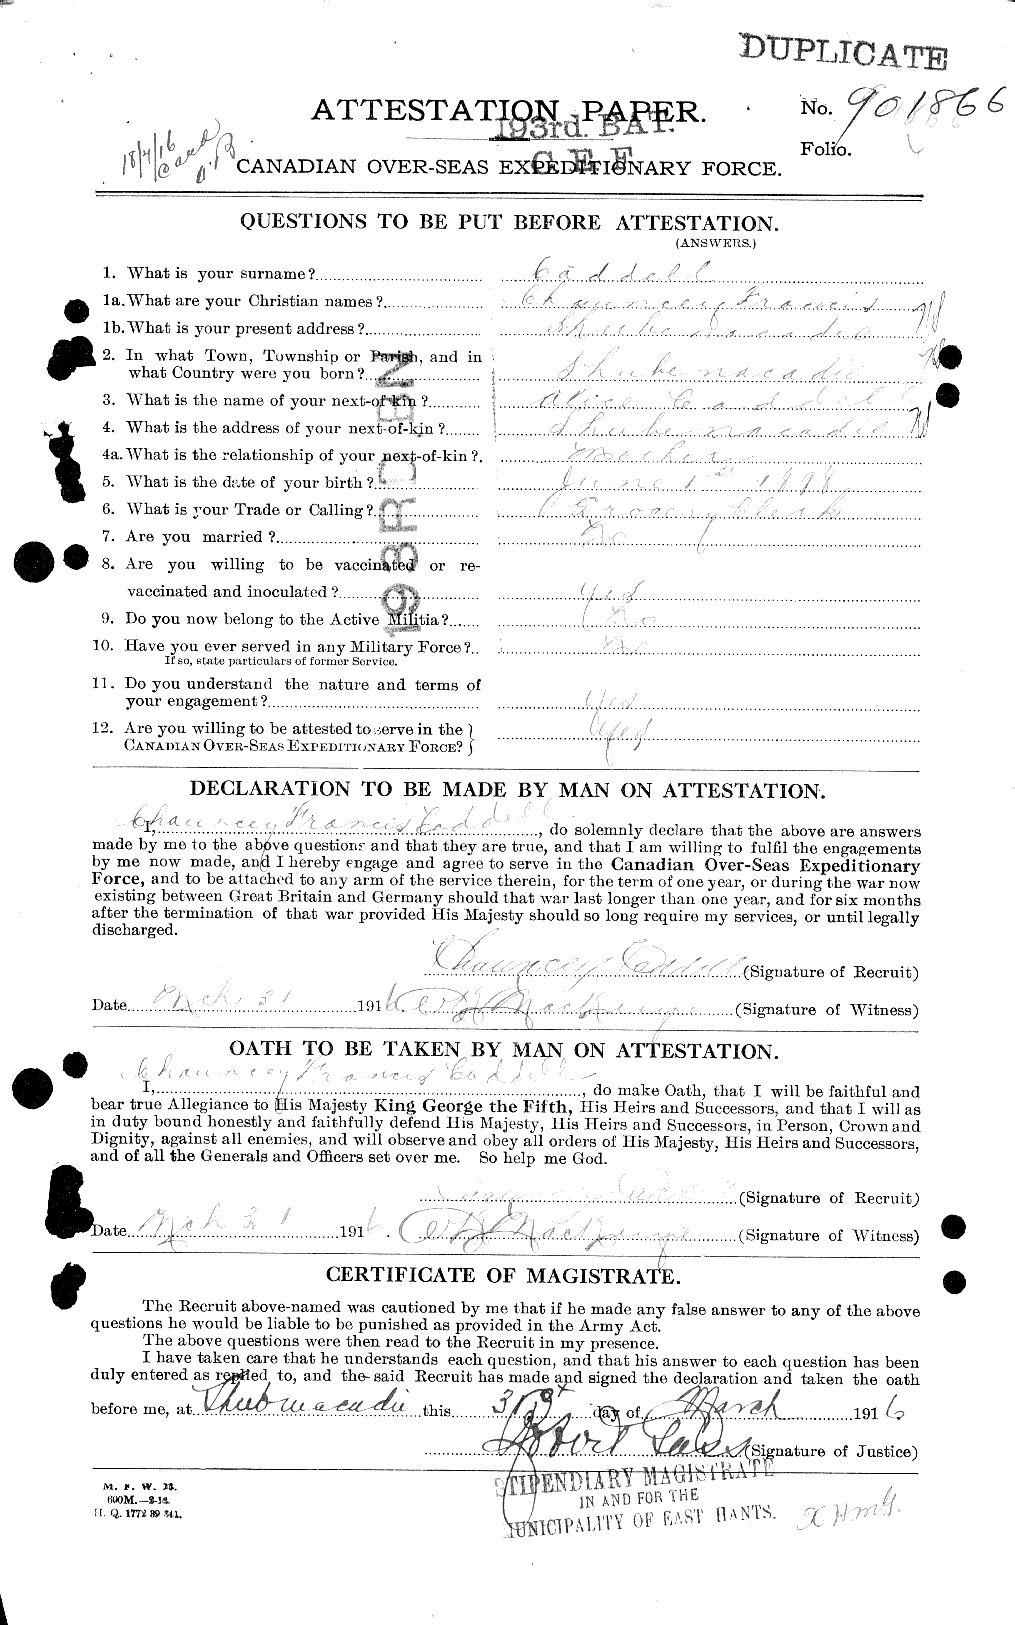 Personnel Records of the First World War - CEF 001505a